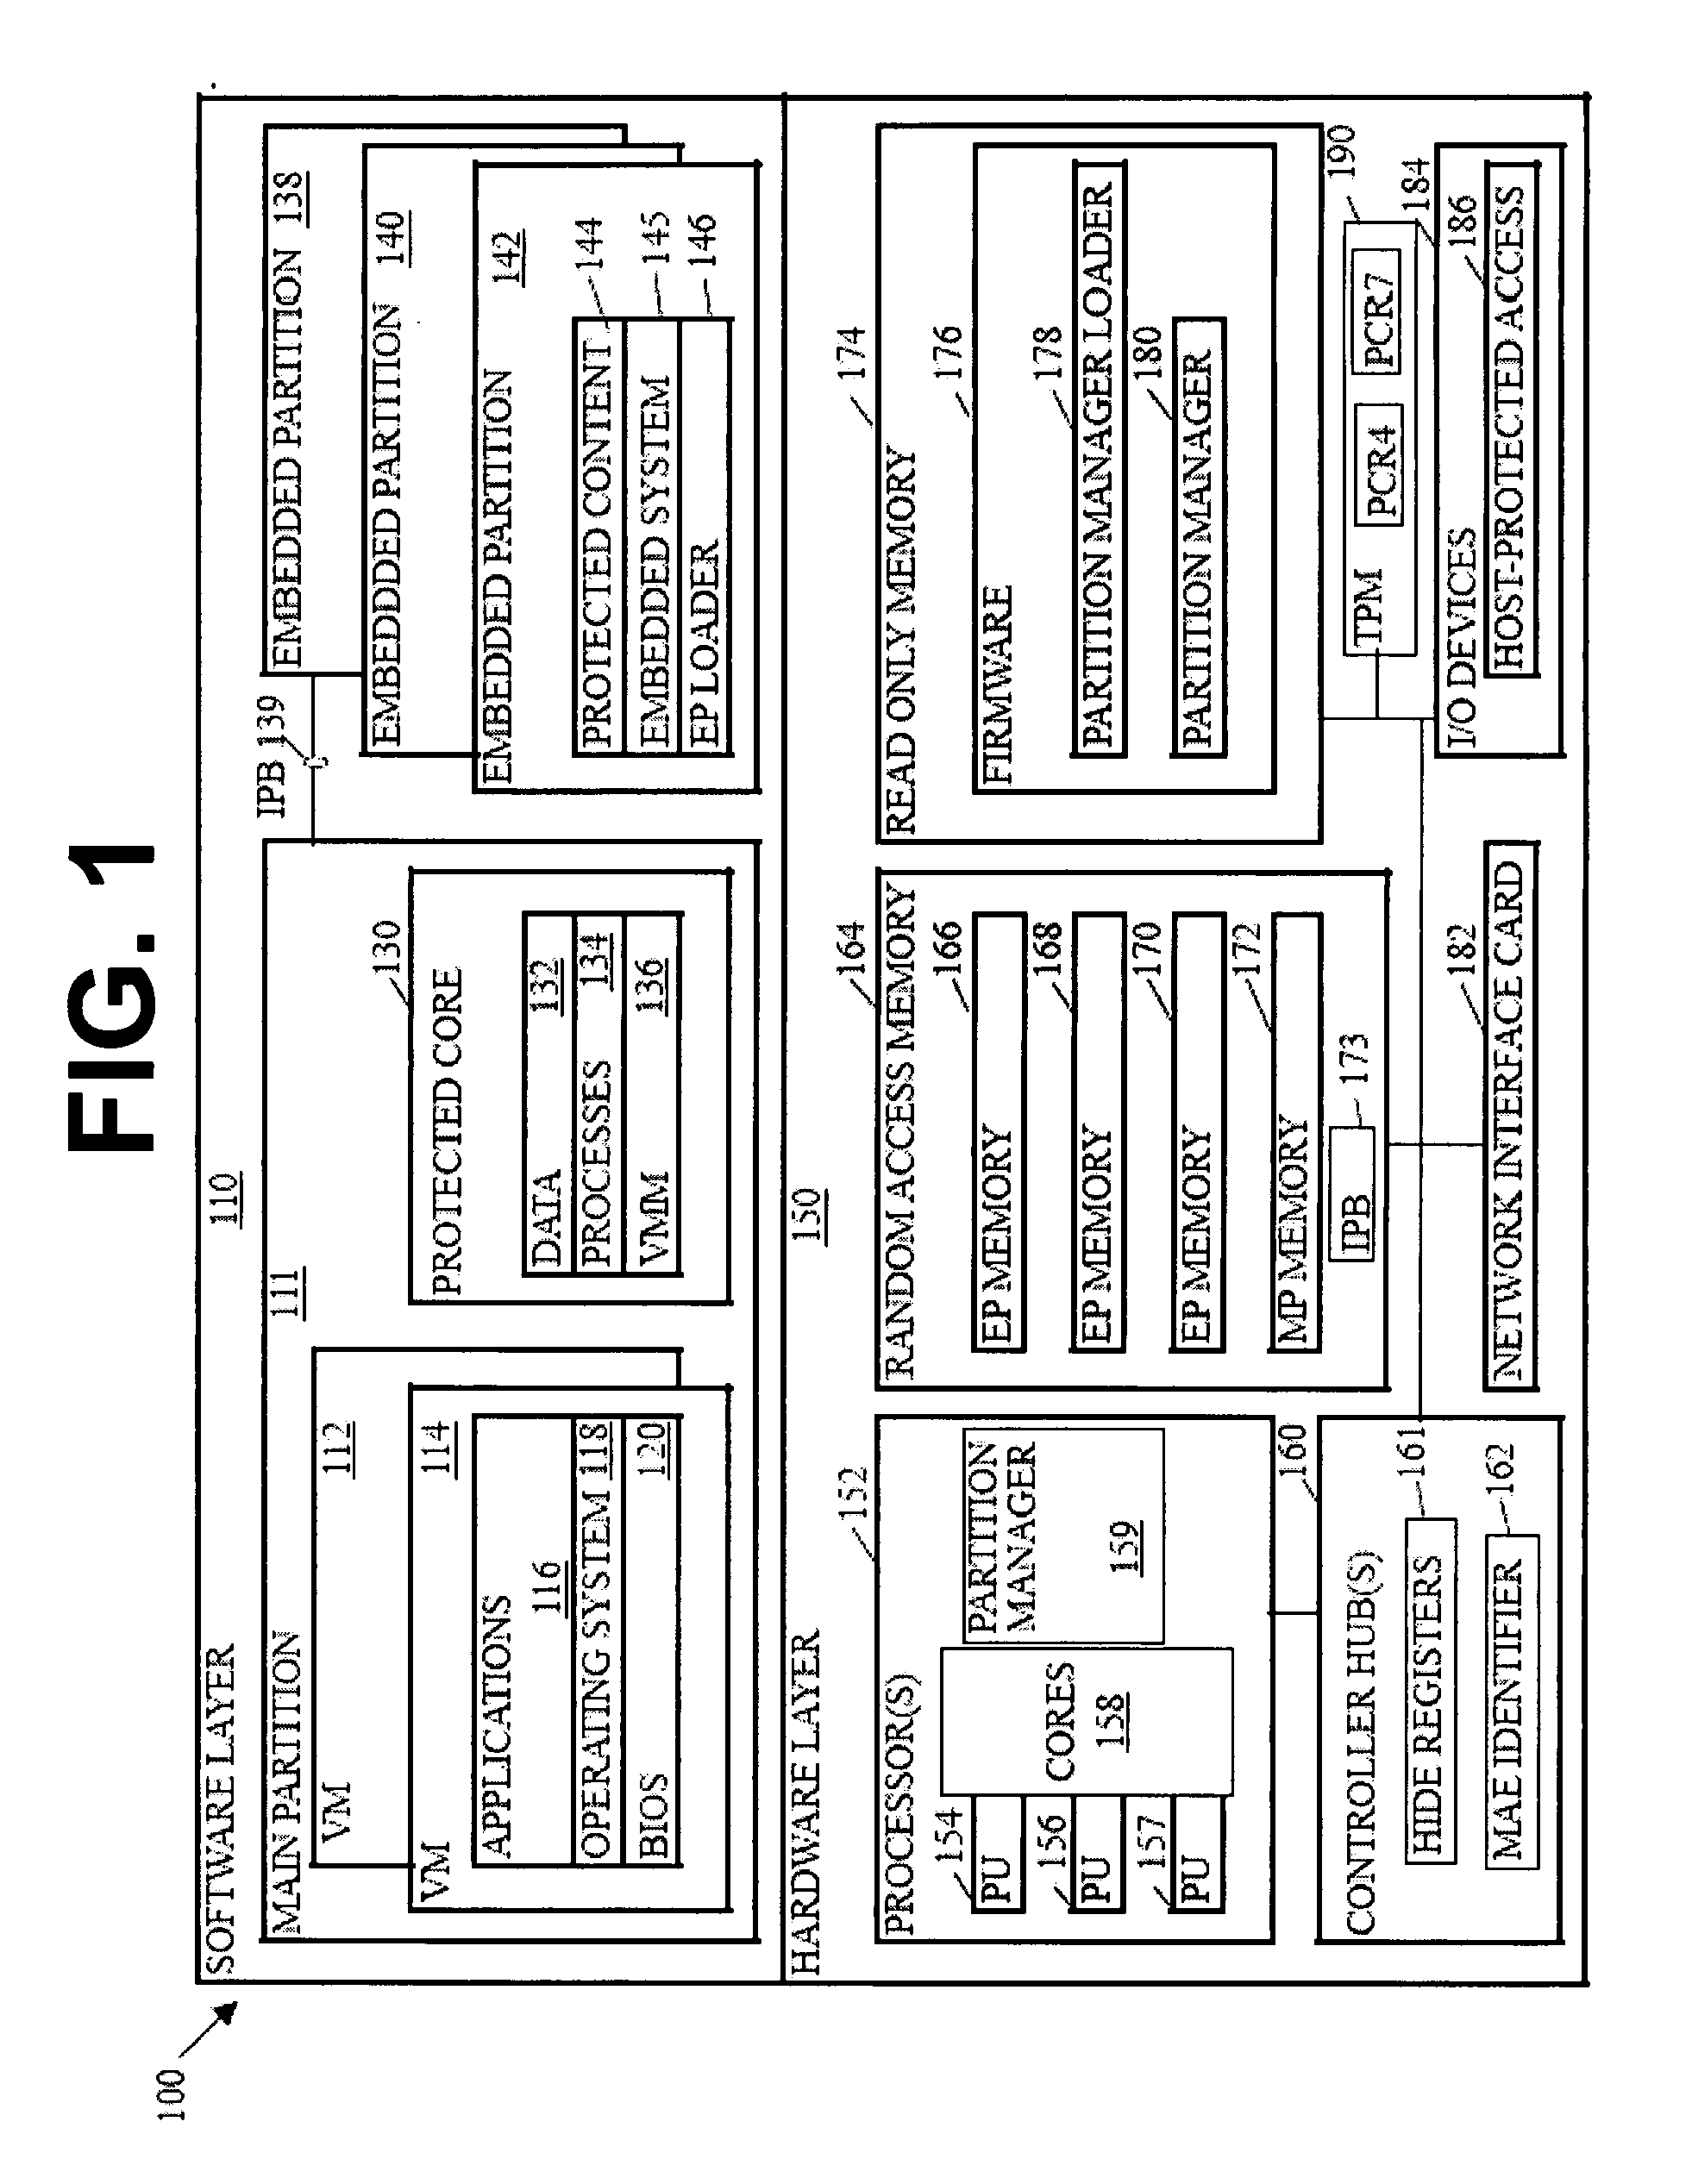 Partitioned scheme for trusted platform module support